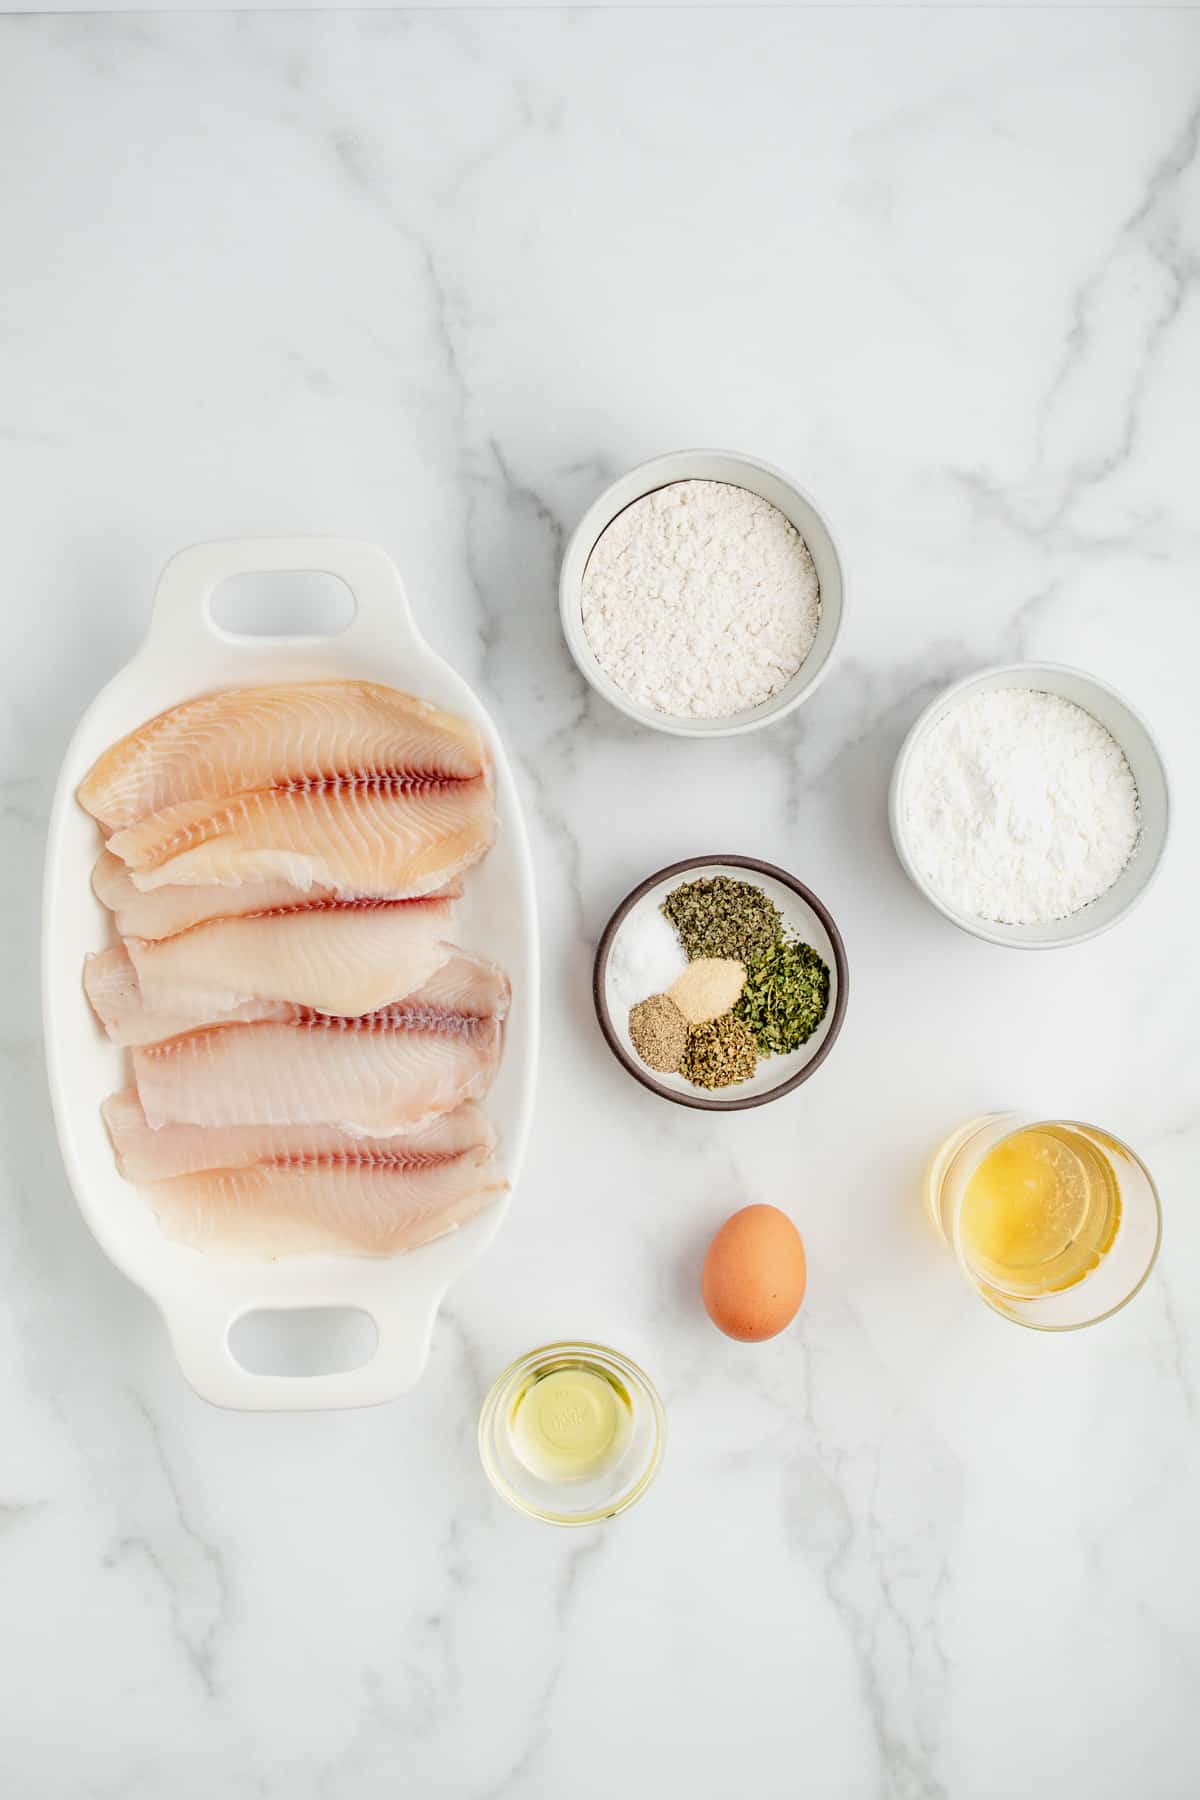 Ingredients needed to make gluten free breaded fish.